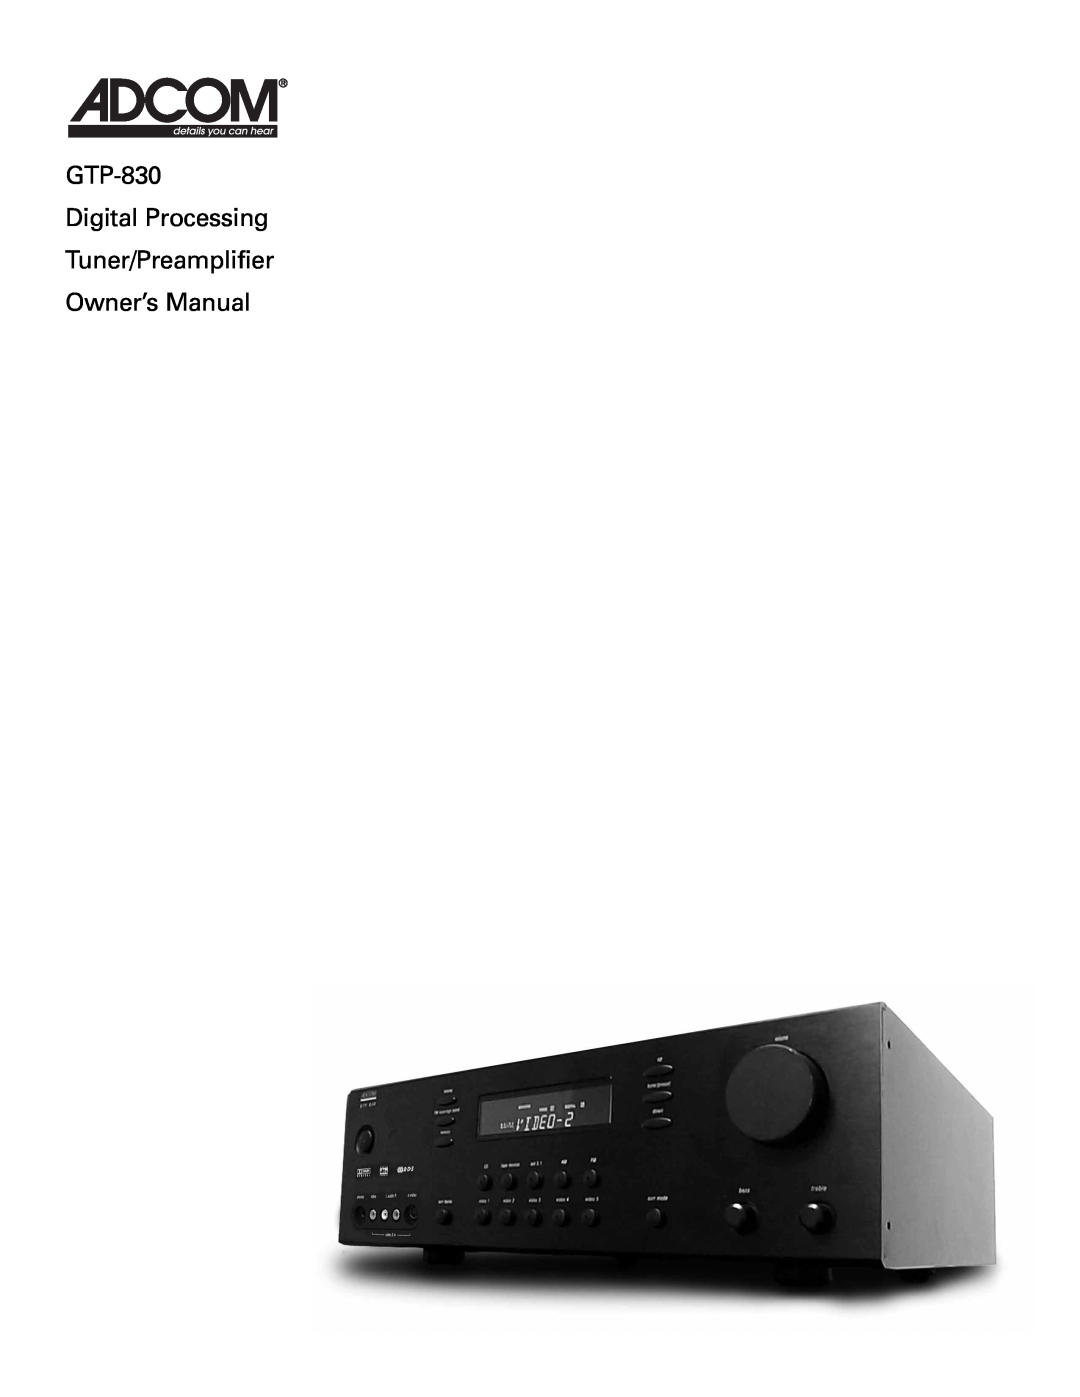 Adcom owner manual GTP-830 Digital Processing Tuner/Preamplifier 